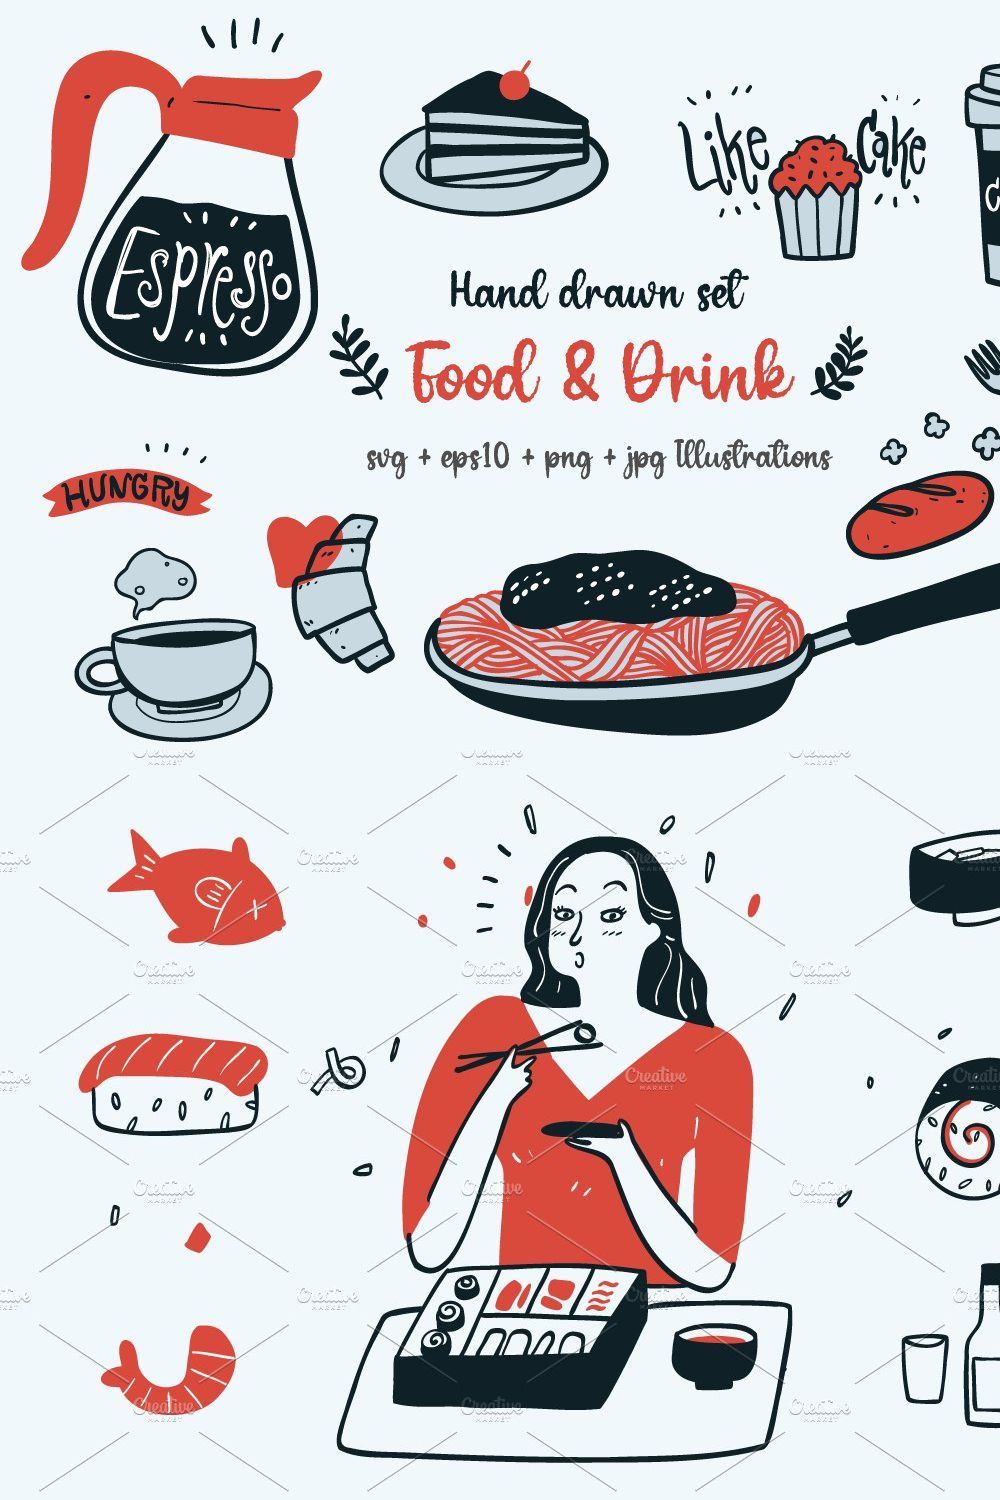 Hand drawn Food & Drink pinterest preview image.